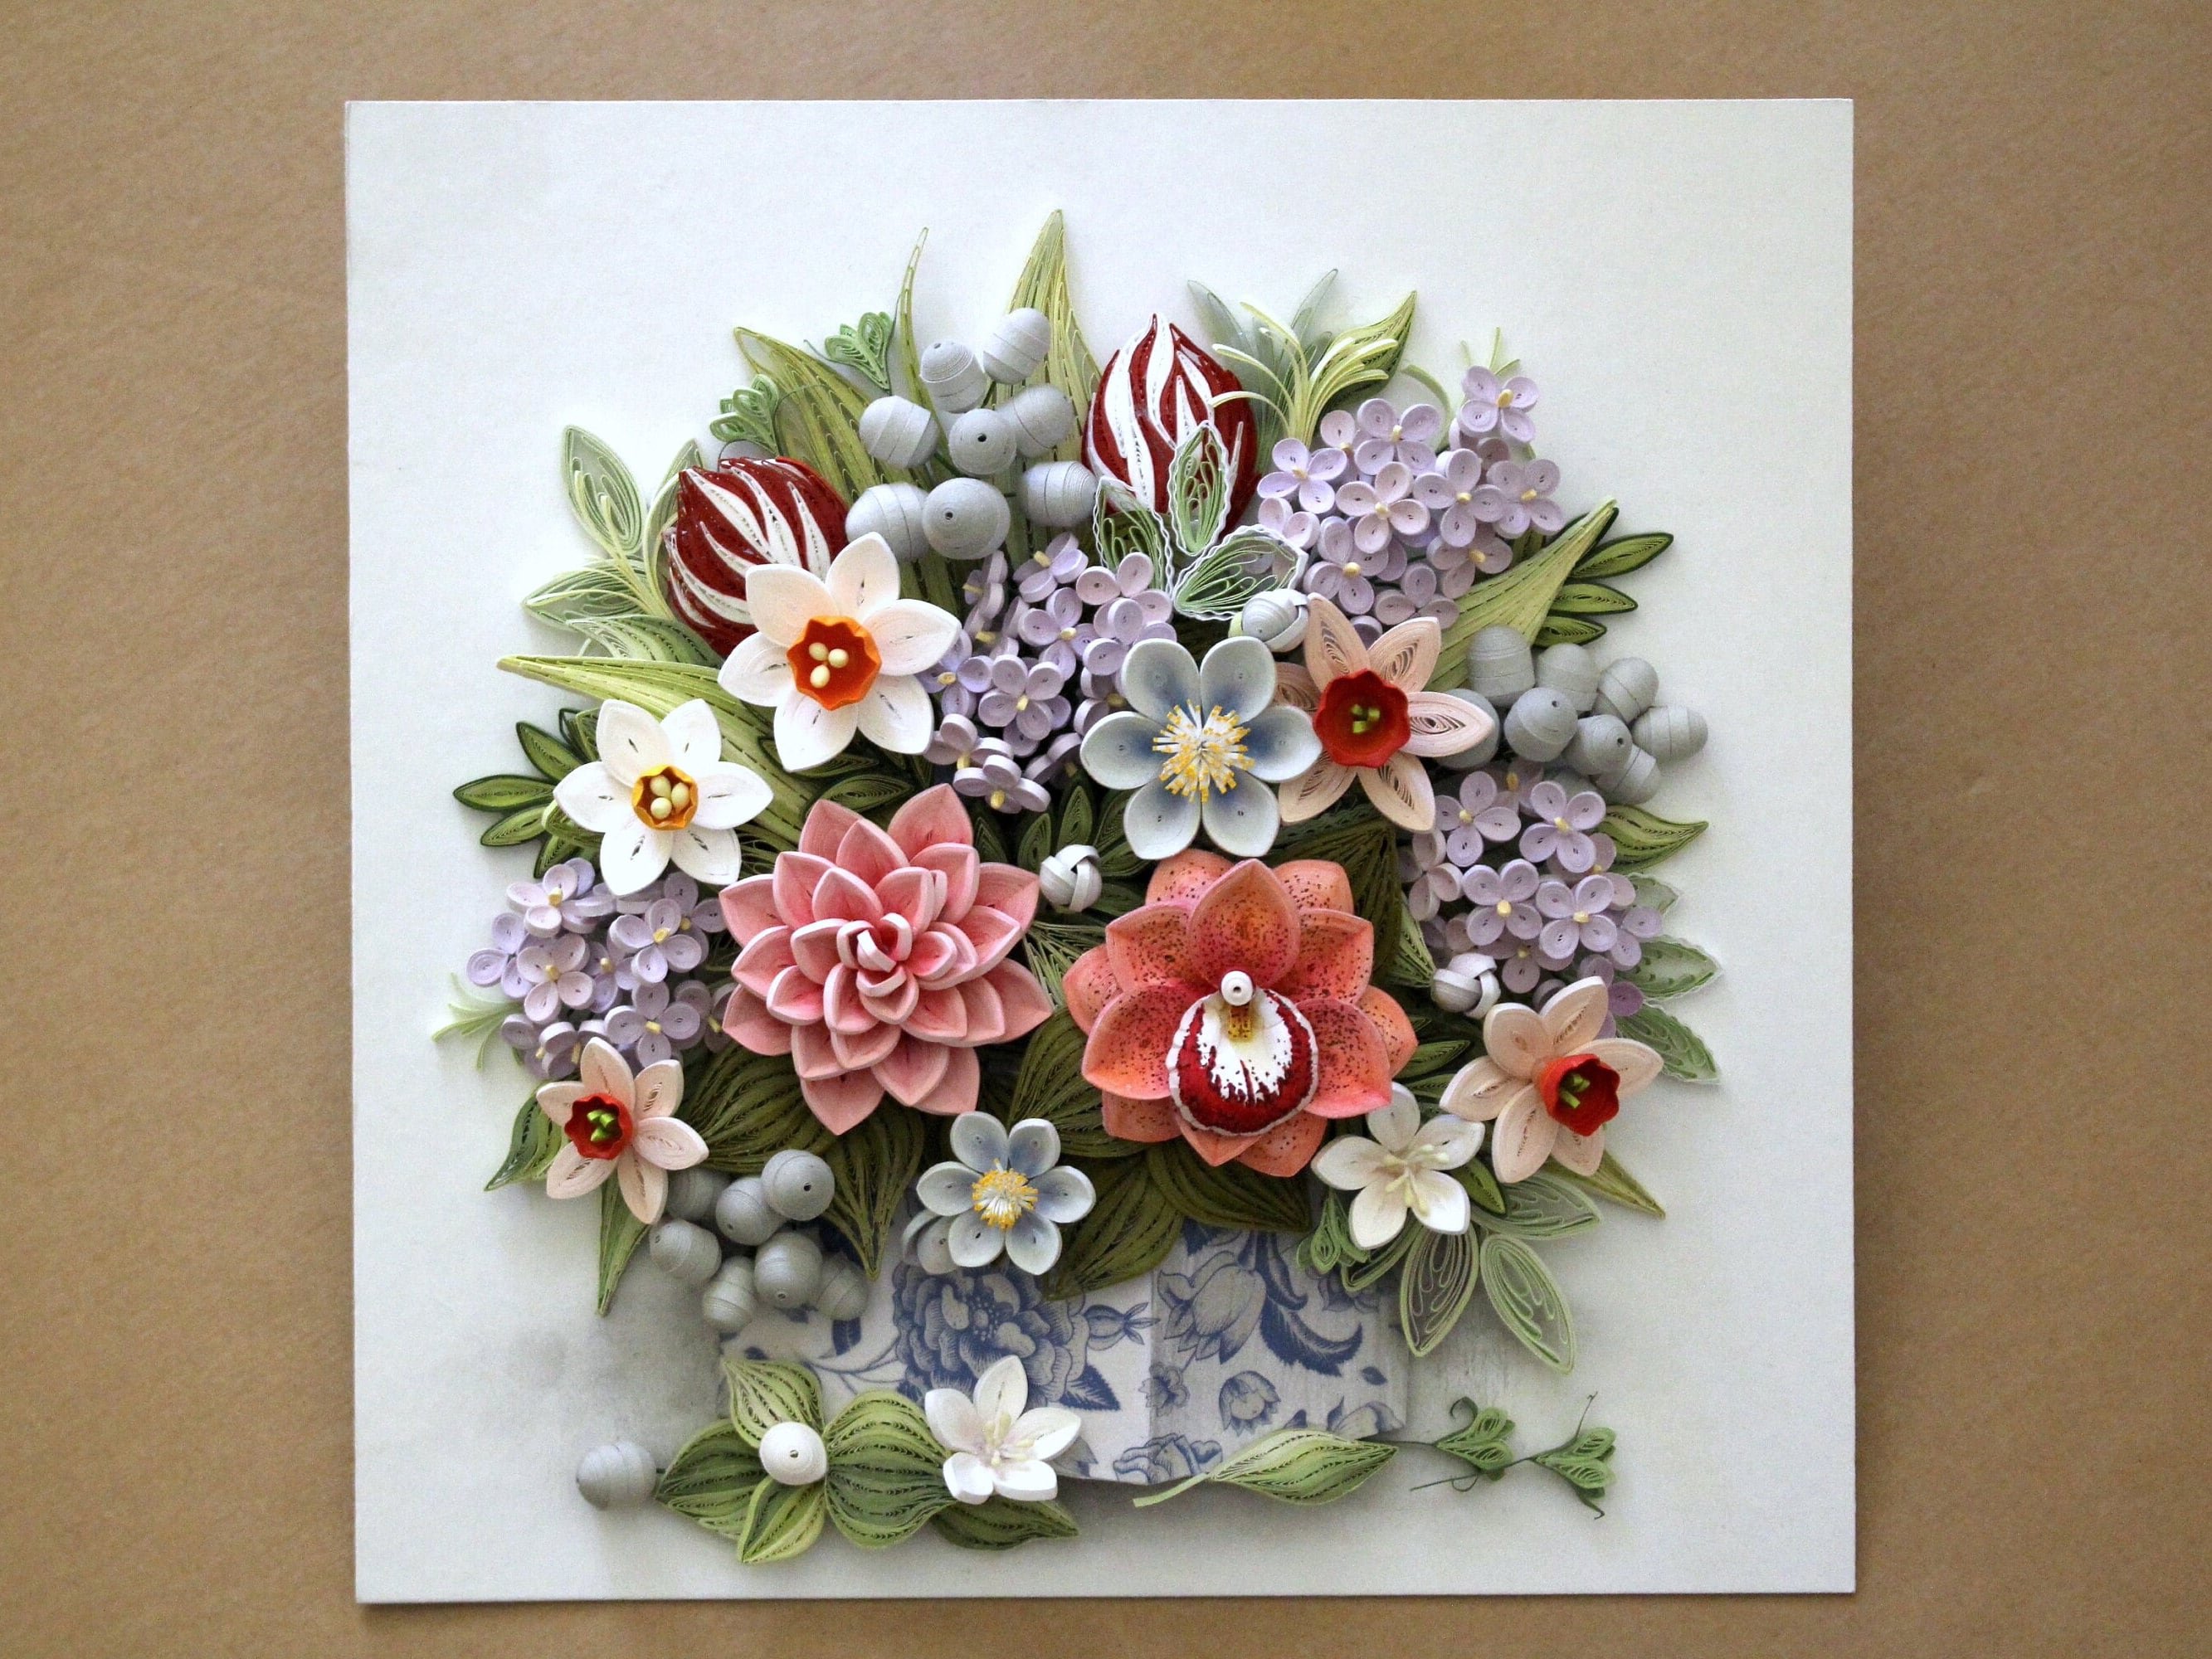 The Art of Paper Quilling - Flower Magazine